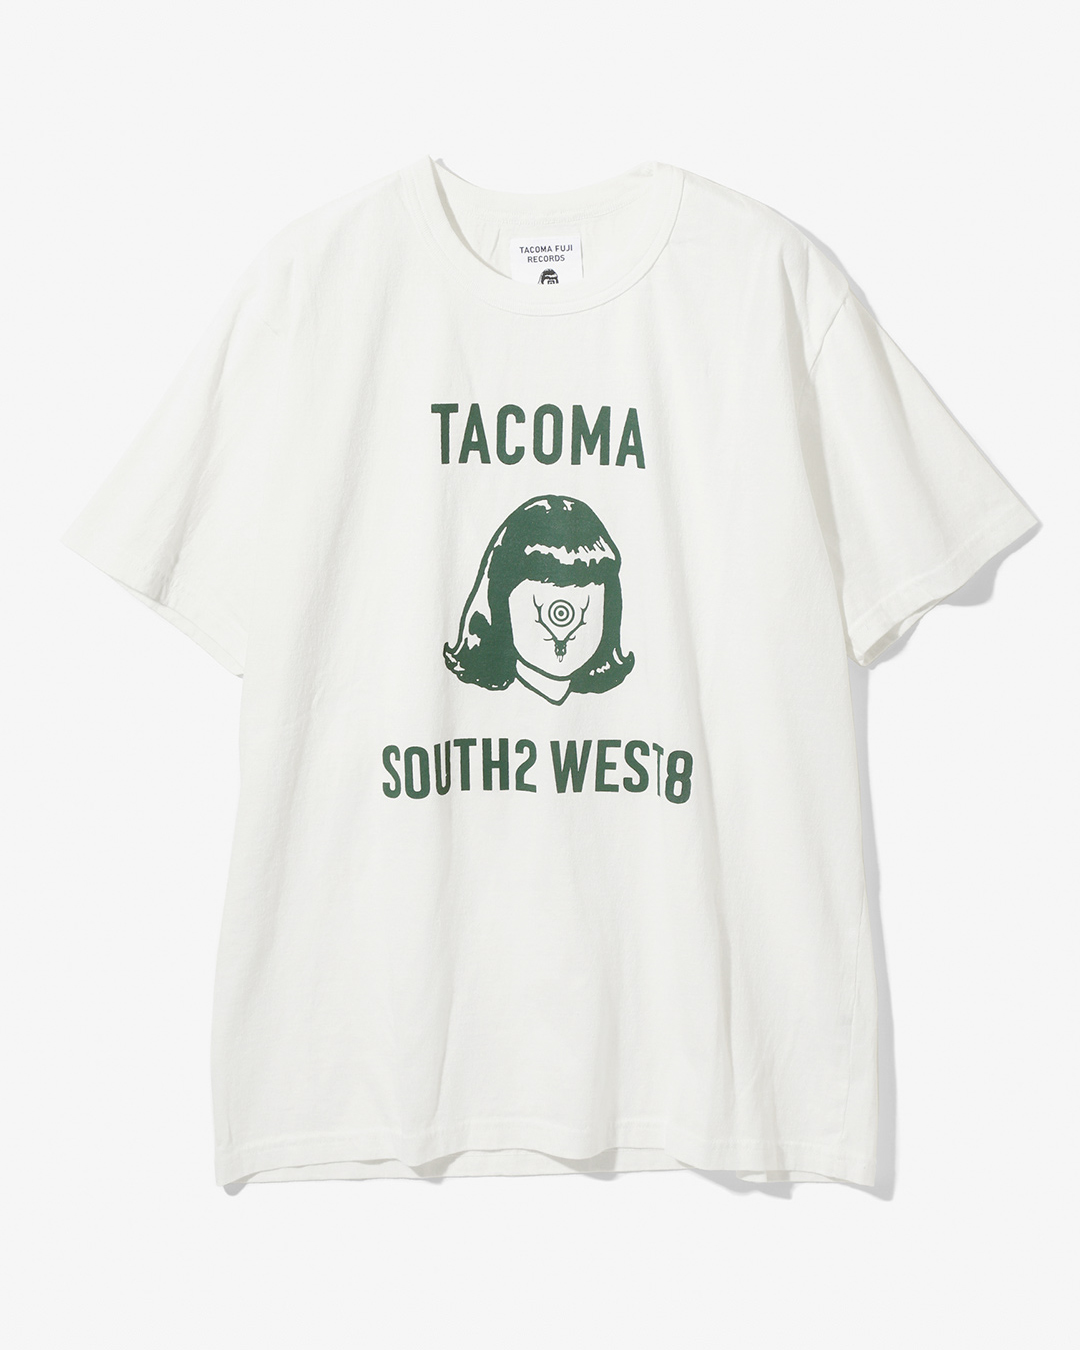 SOUTH2 WEST8の別注アイテムも登場。TACOMA FUJI RECORDSがNEPENTHES